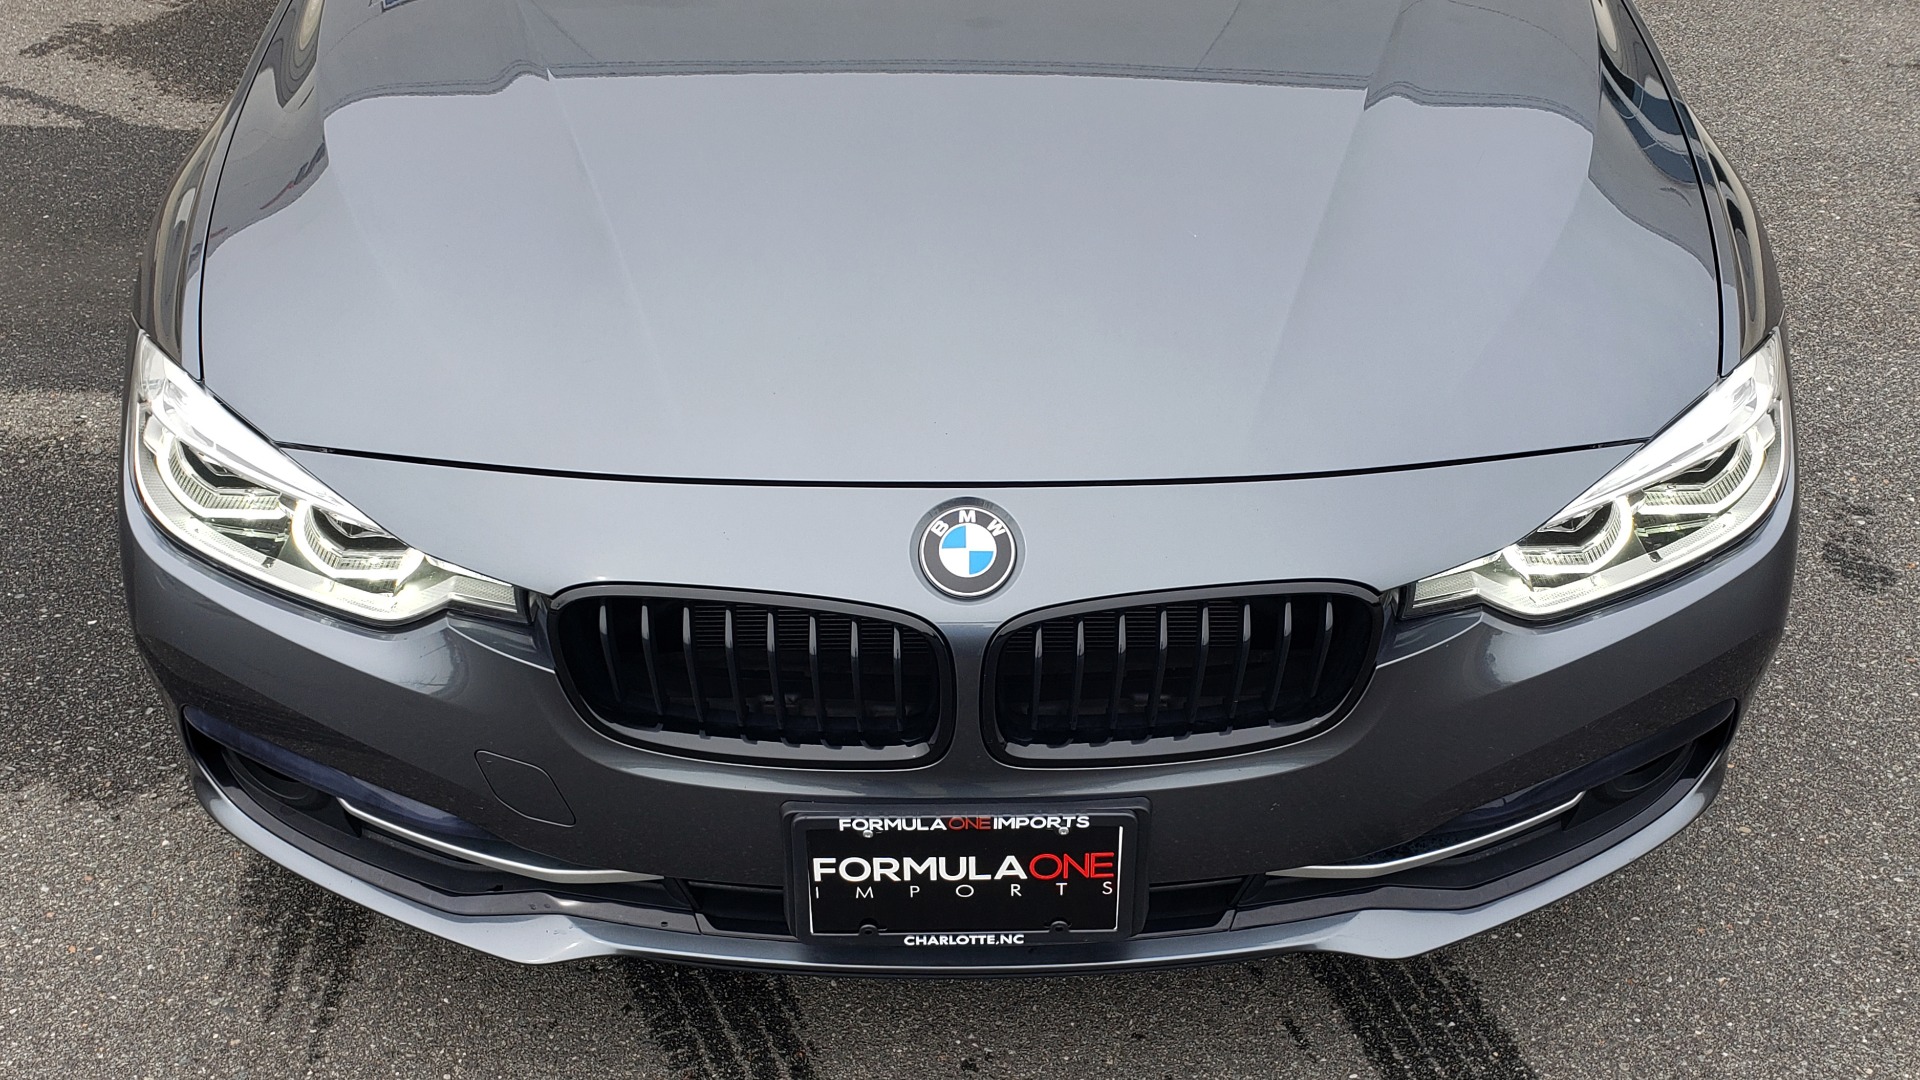 Used 2018 BMW 3 SERIES 330I XDRIVE PREMIUM / CONV PKG NAV / BLIND SPOT / HTD STS / REARVIEW for sale Sold at Formula Imports in Charlotte NC 28227 24